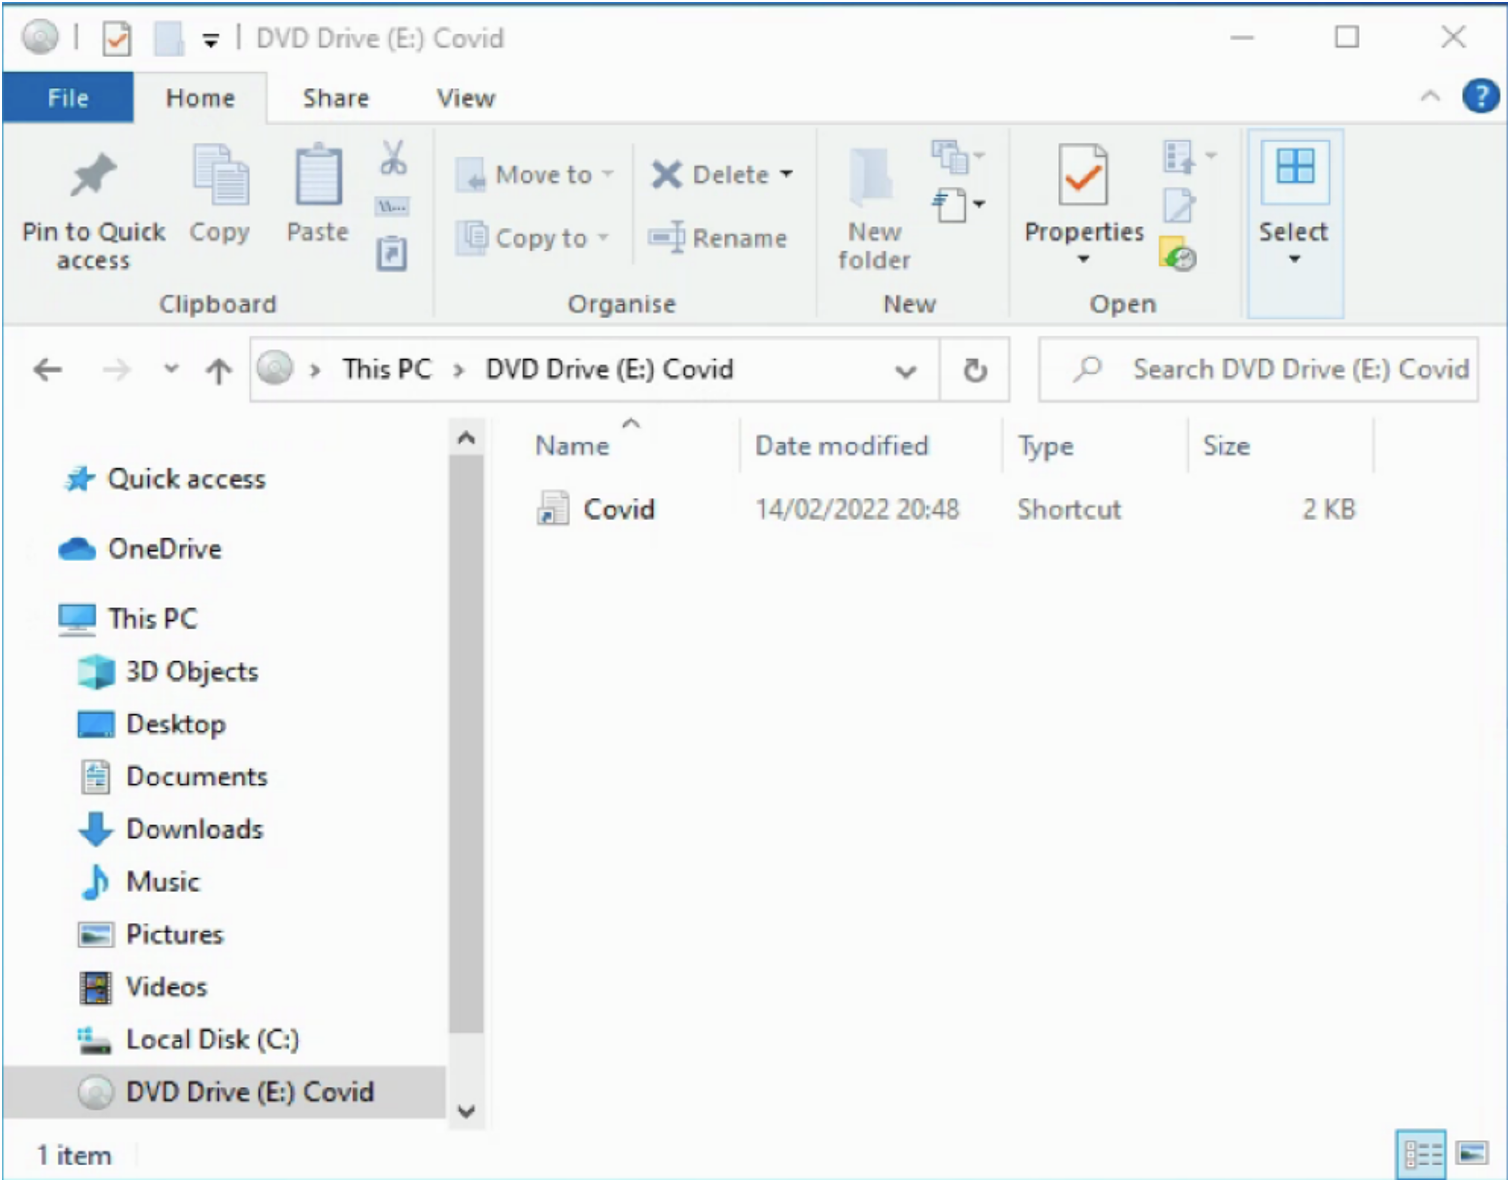 An example ISO file delivered as part of a Covid related email phishing email, without the malicious DLL or parent folder visible. In this case, the DLL is executed by rundll32.exe as referenced by the lure “Covid” LNK shortcut file.